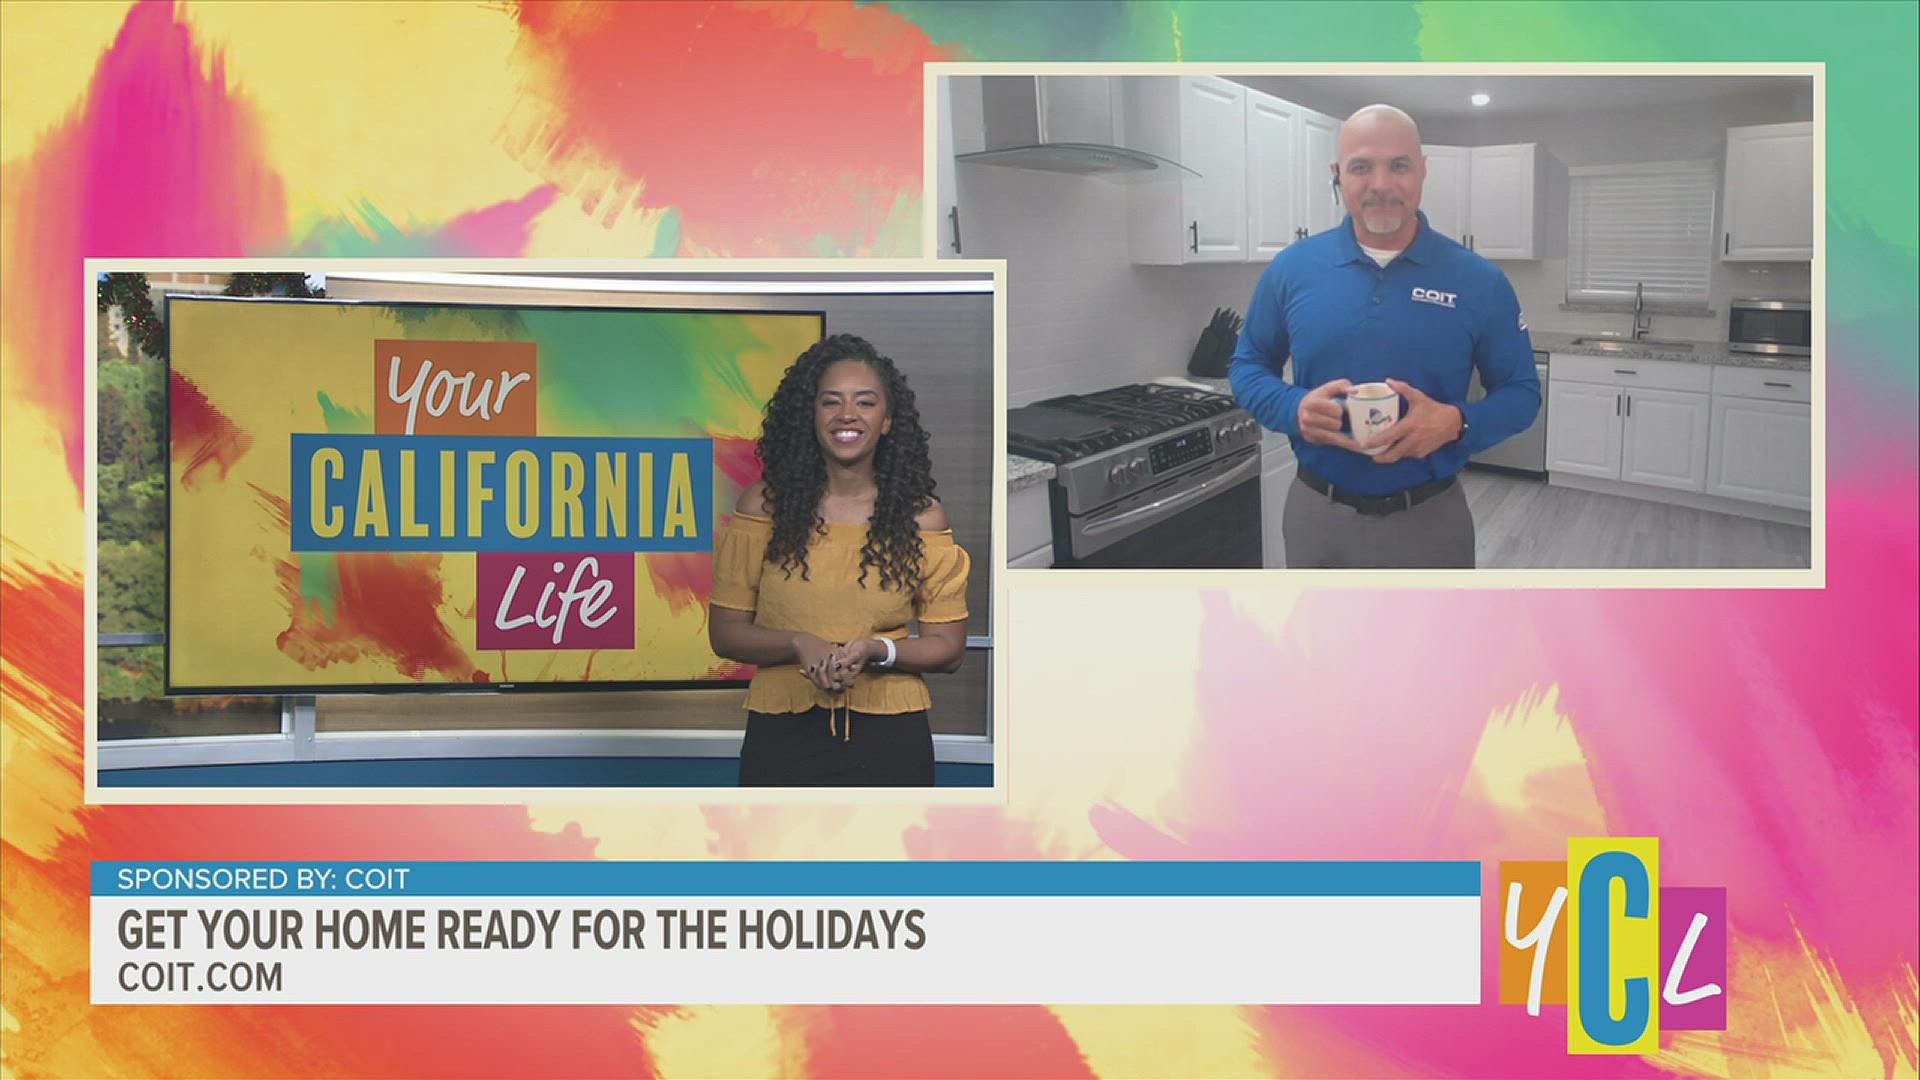 If you’re hosting a get together this holiday season, check out how to keep your living space in tip top shape for when guests arrive. This segment paid for by COIT.